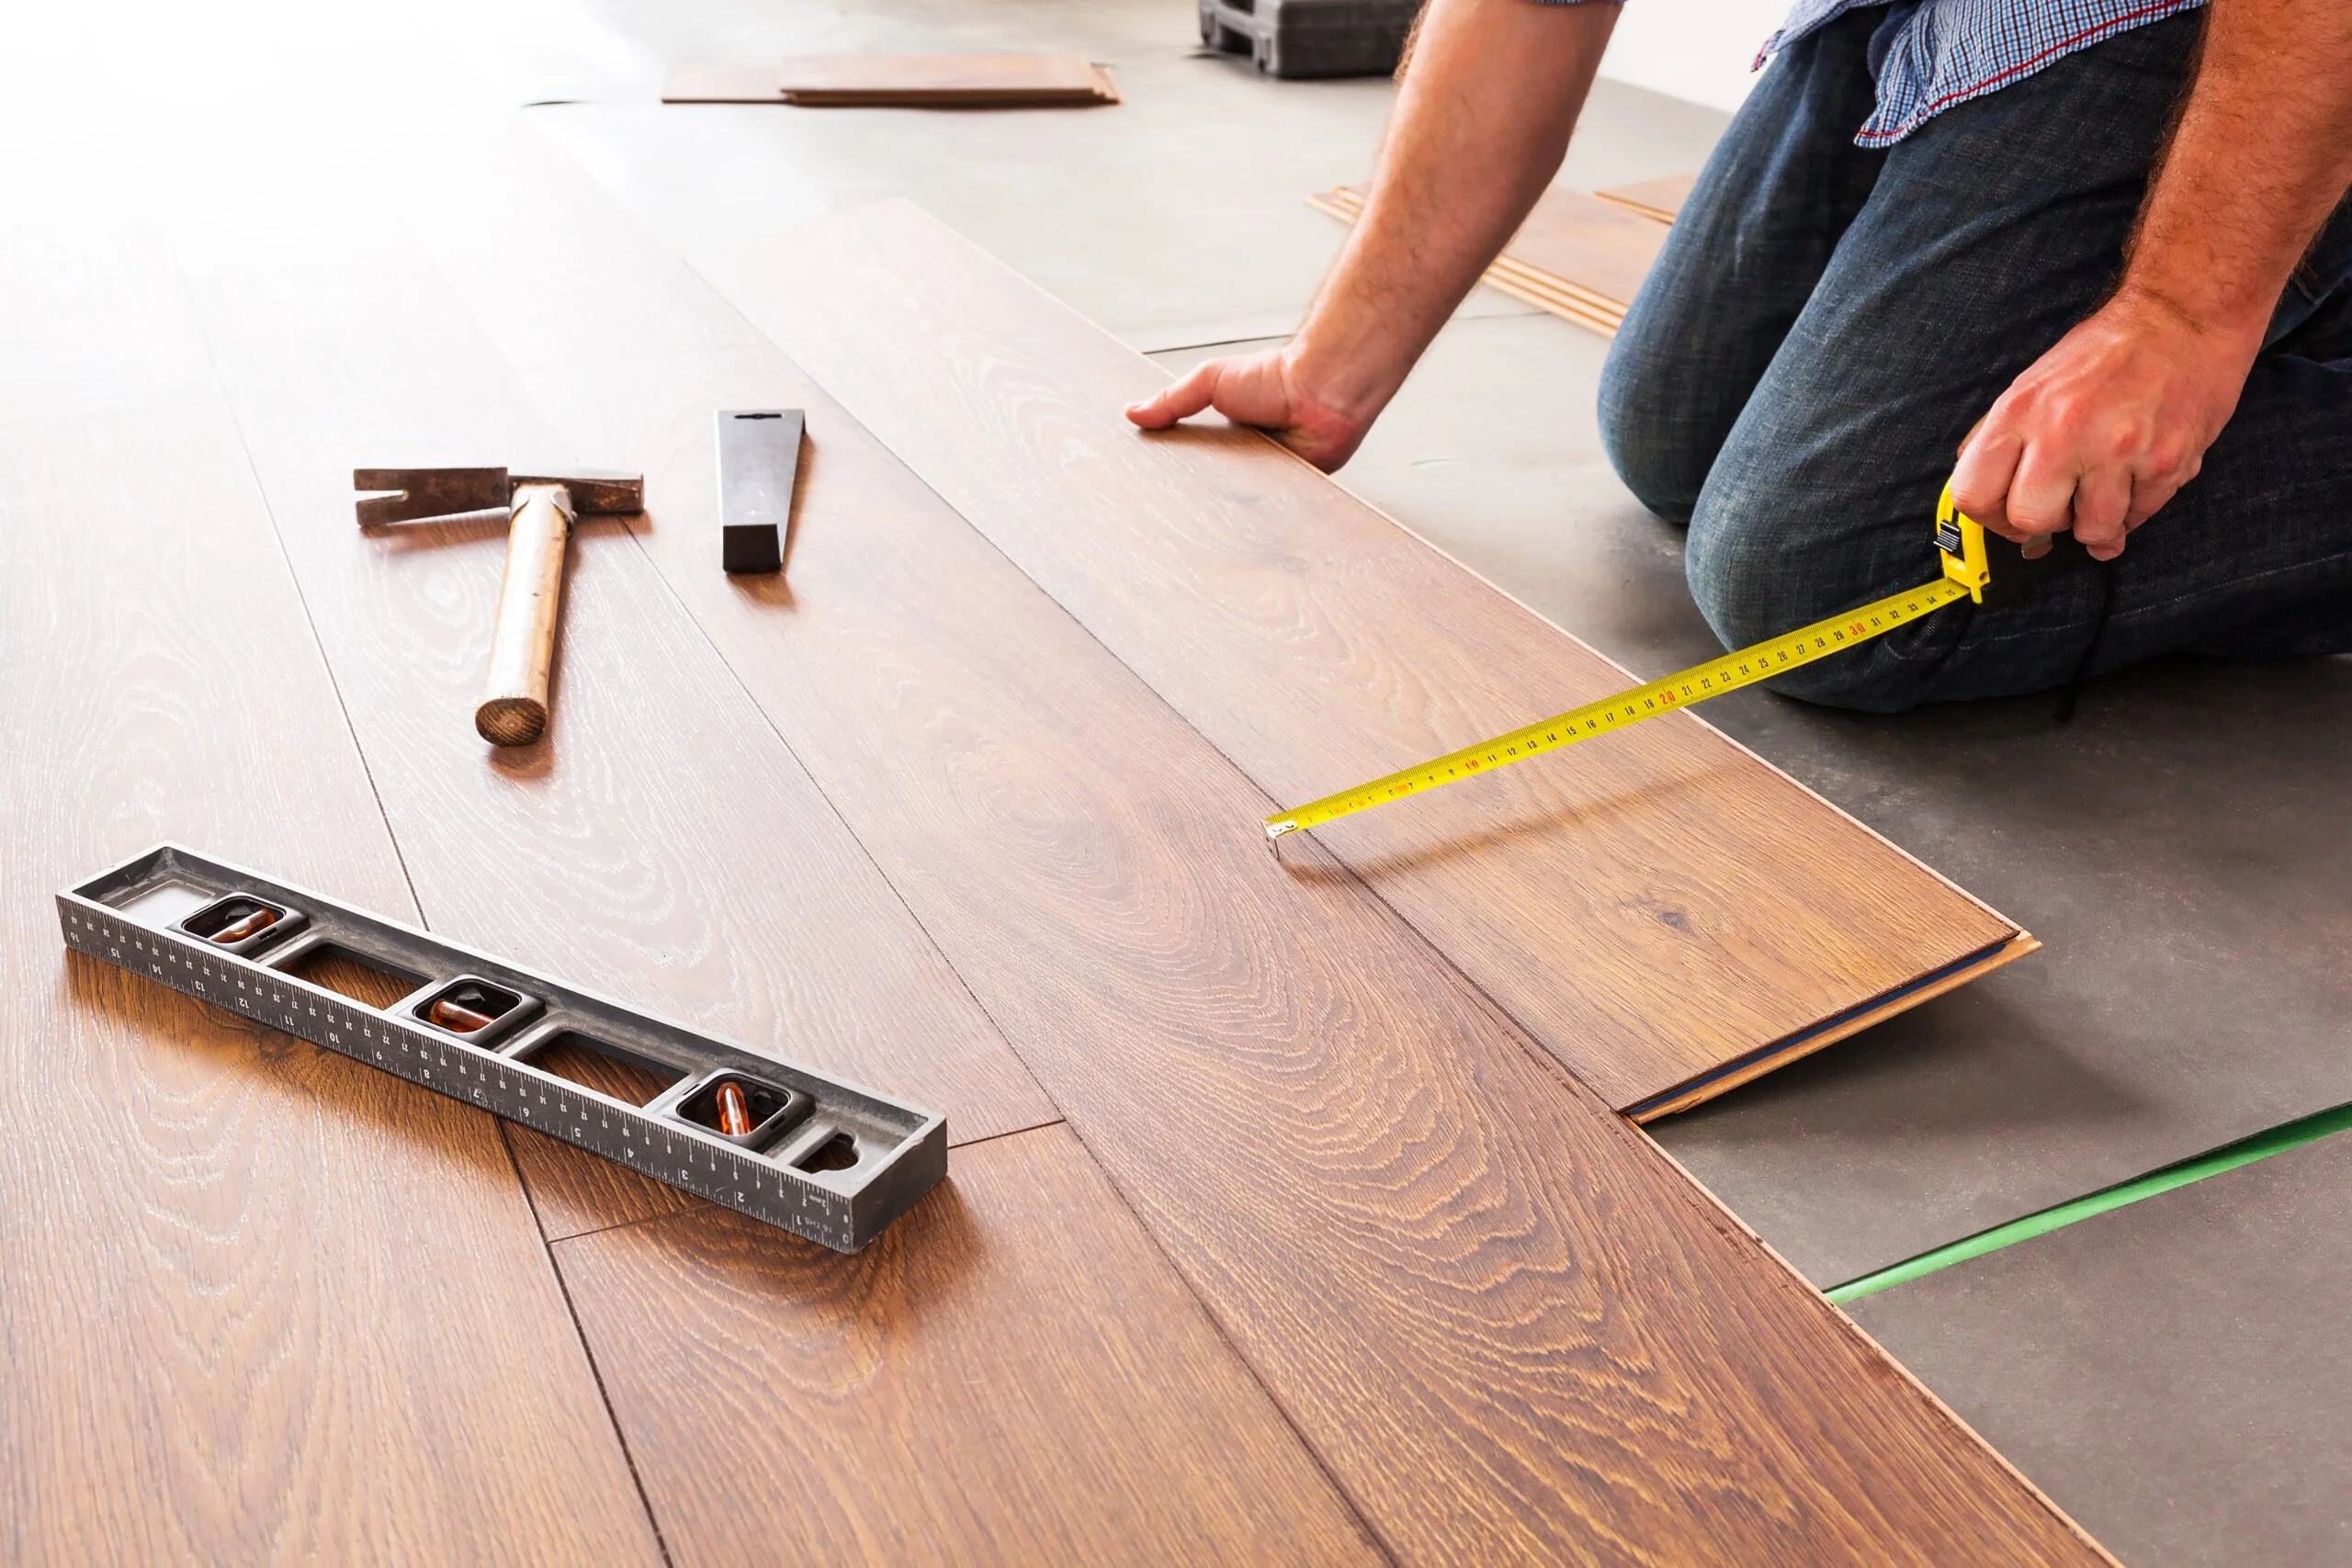 a man measuring a wooden floor with a tape measure